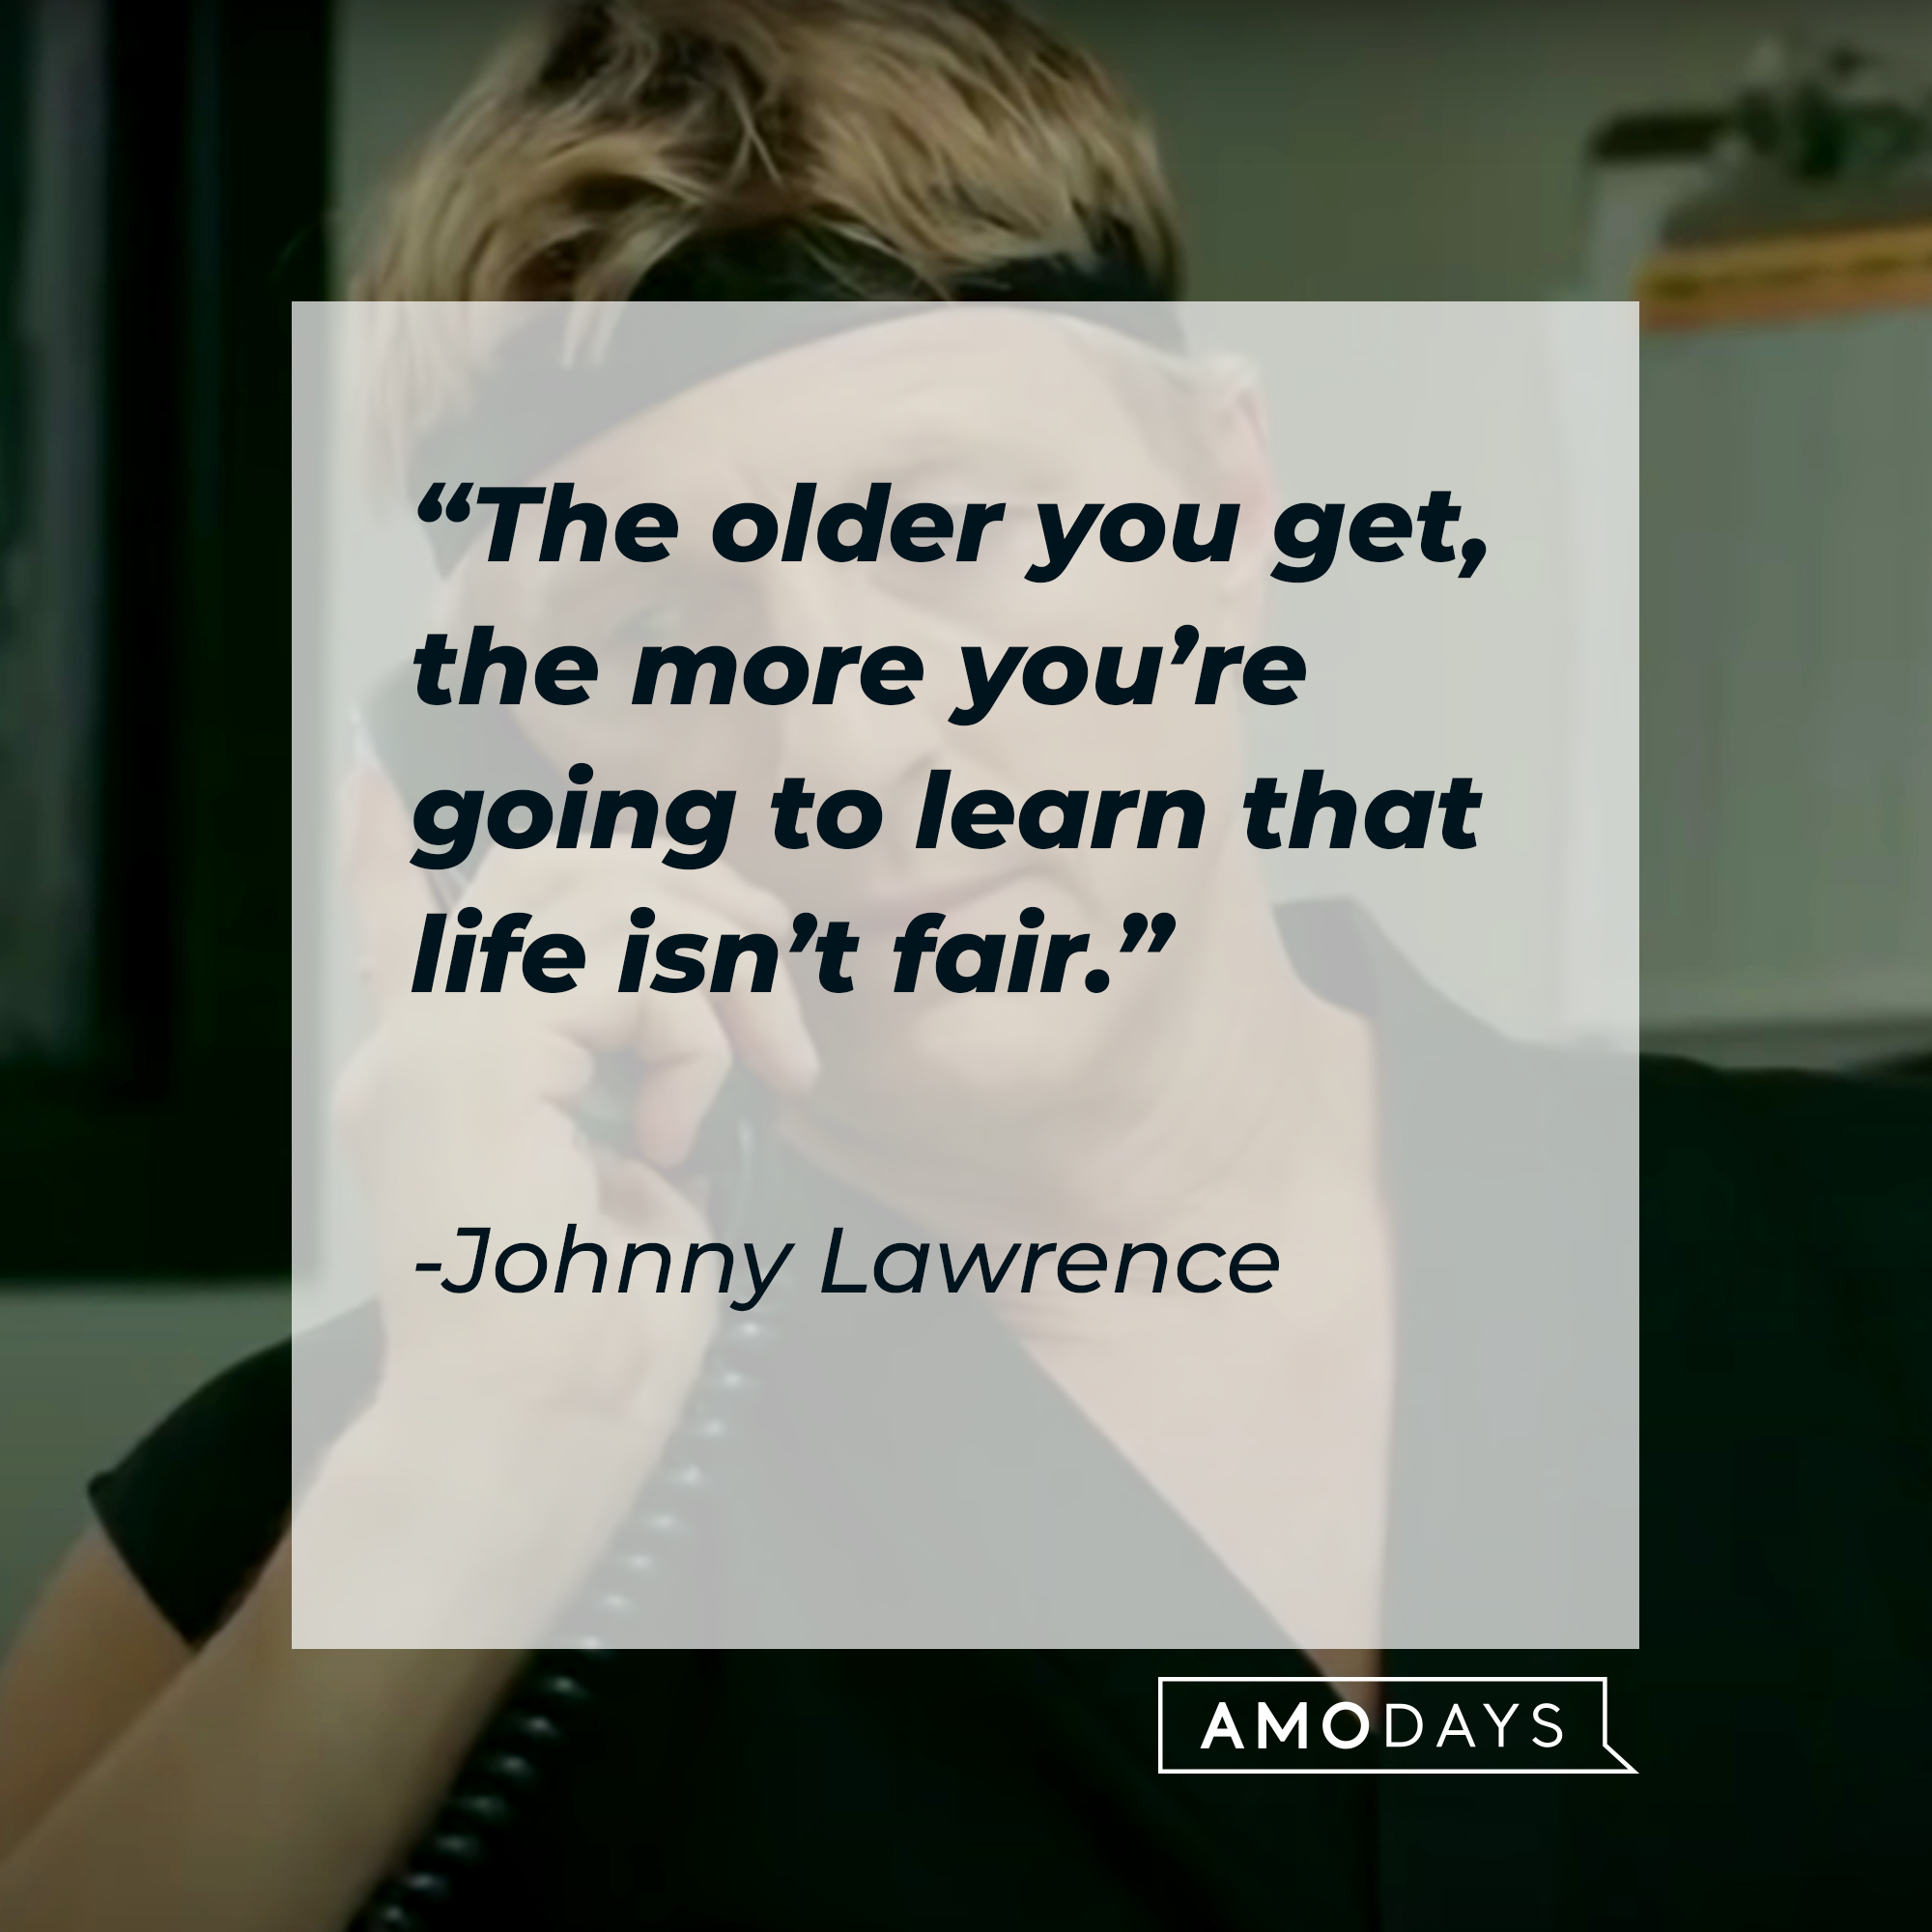 Johnny Lawrence, with his quote: “The older you get, the more you’re going to learn that life isn’t fair.” | Source: facebook.com/CobraKaiSeries